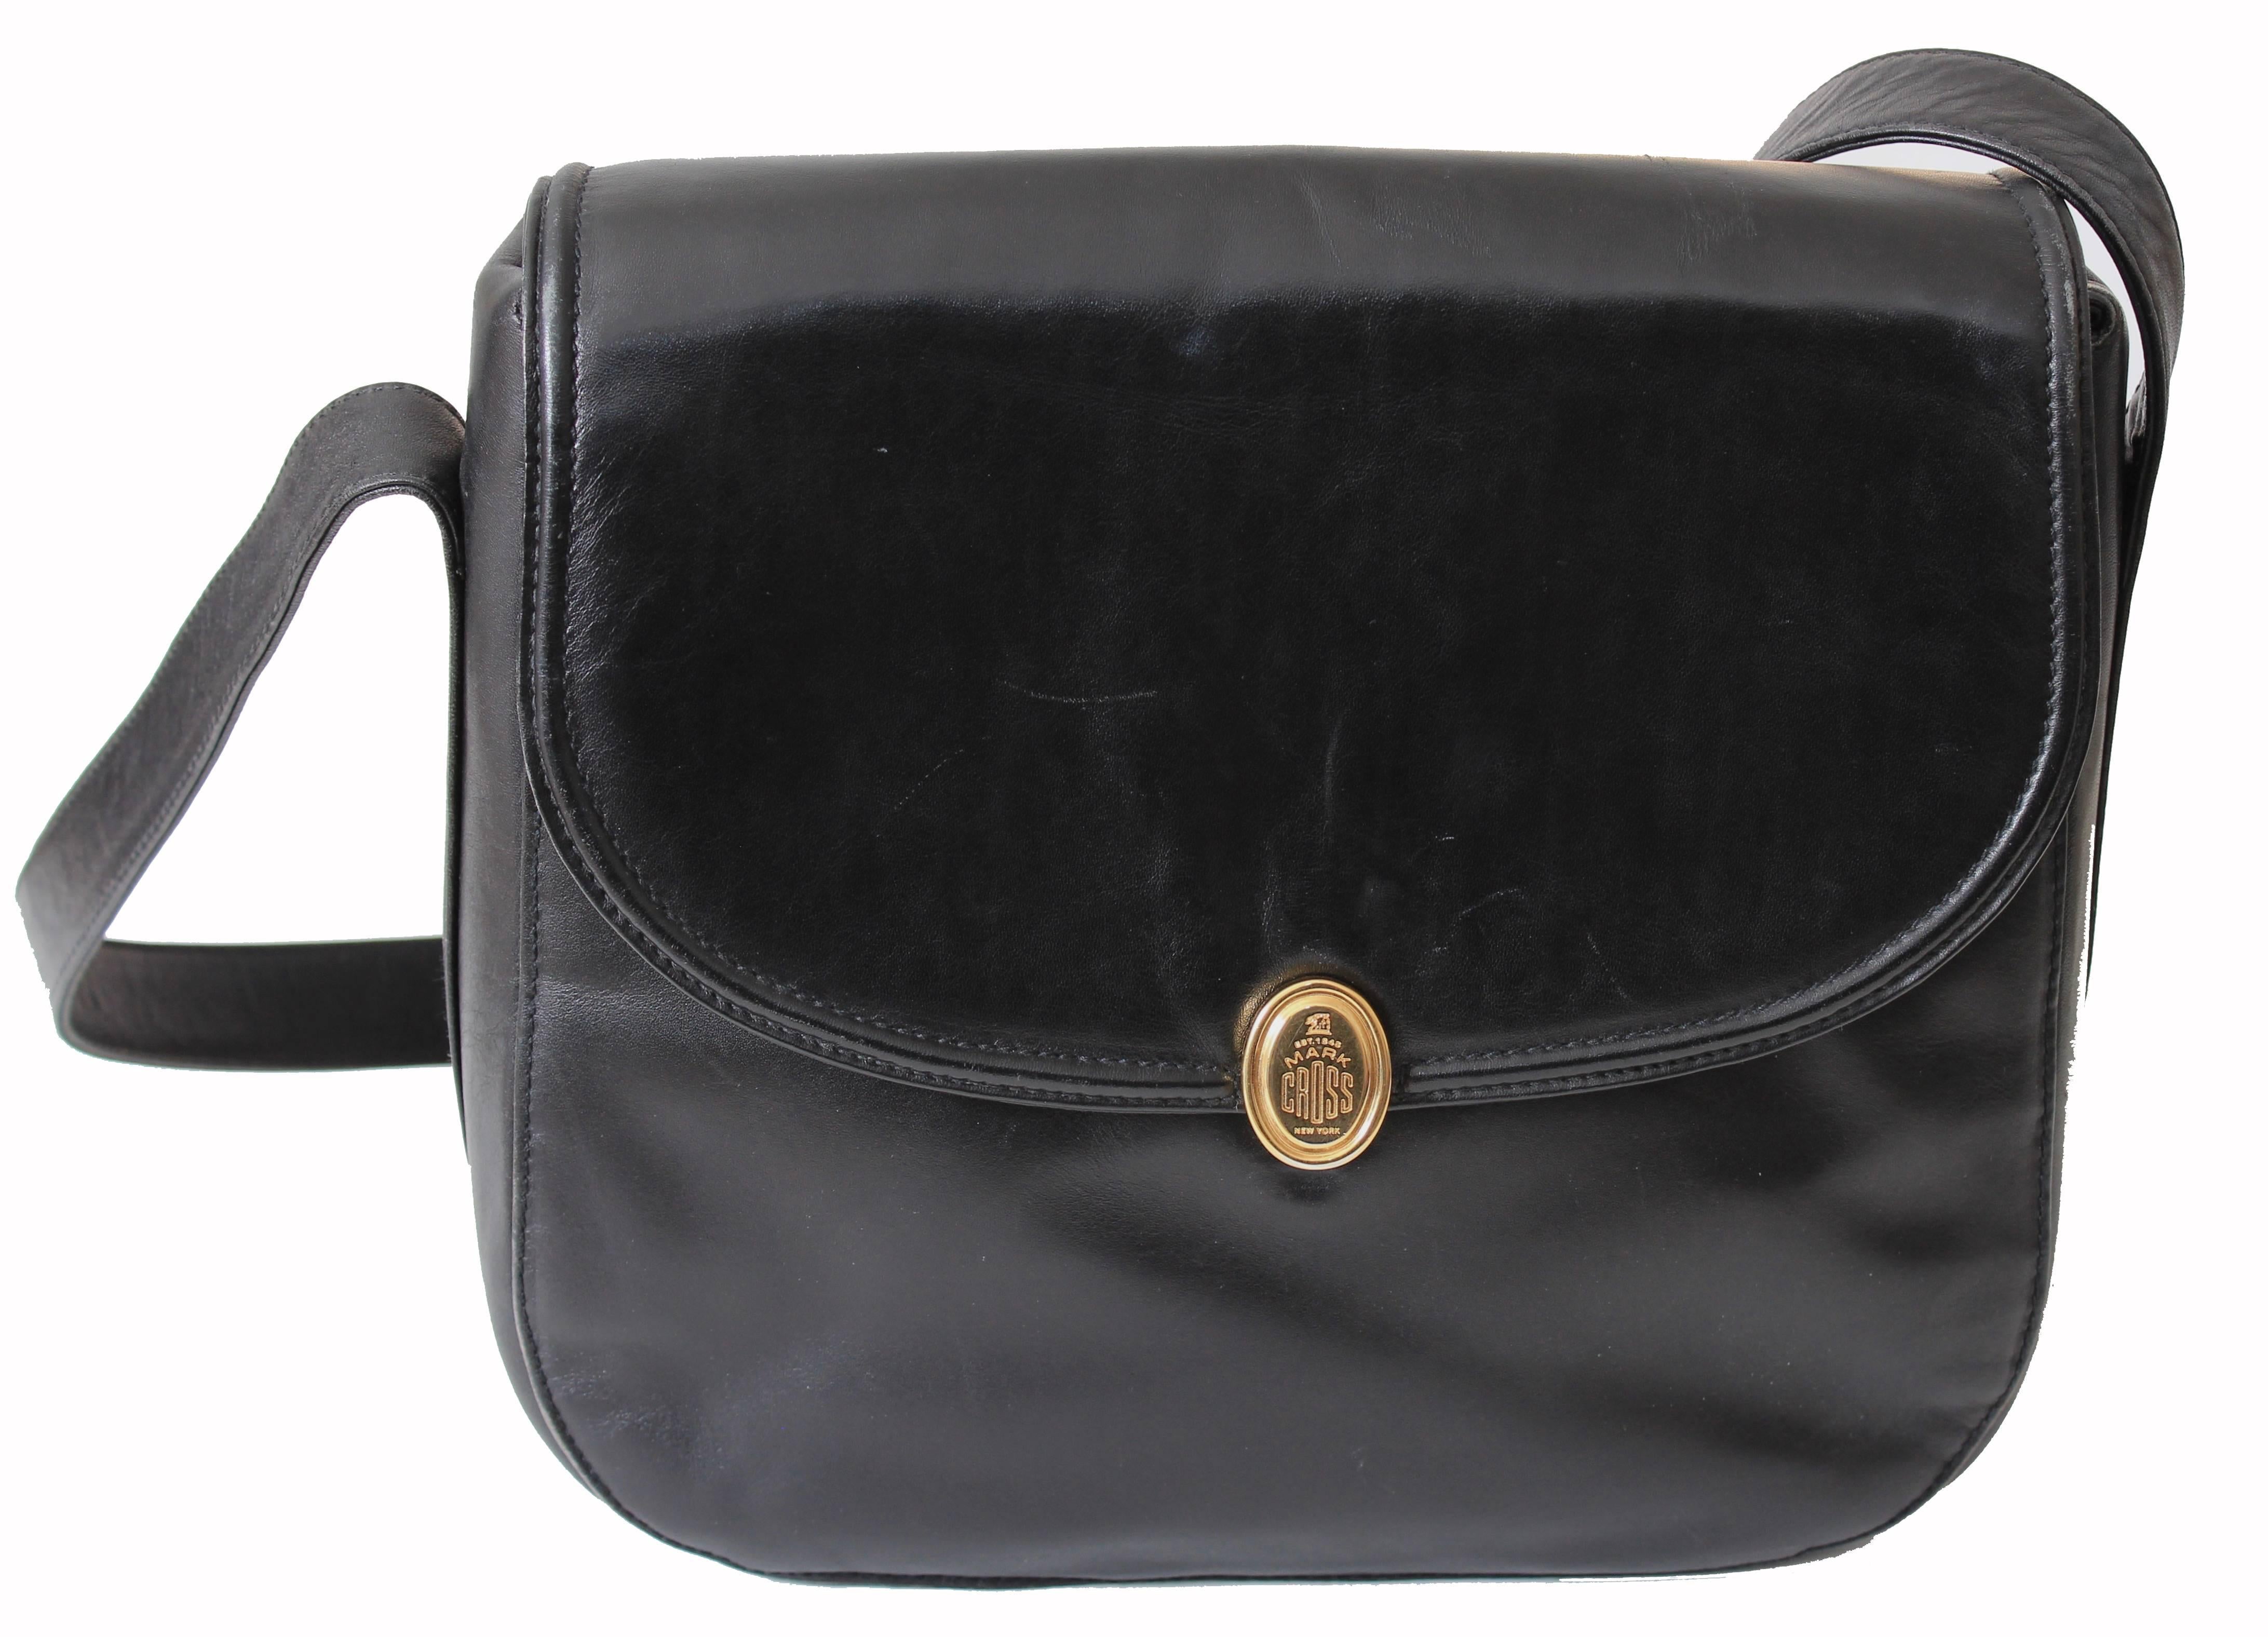 Here's an exquisite black leather messenger bag from Mark Cross, likely made in the late 90s.  Made from supple black calfskin leather, it features a flat exterior pocket and fastens with a gold logo clasp.  The interior is lined in tan pigskin and